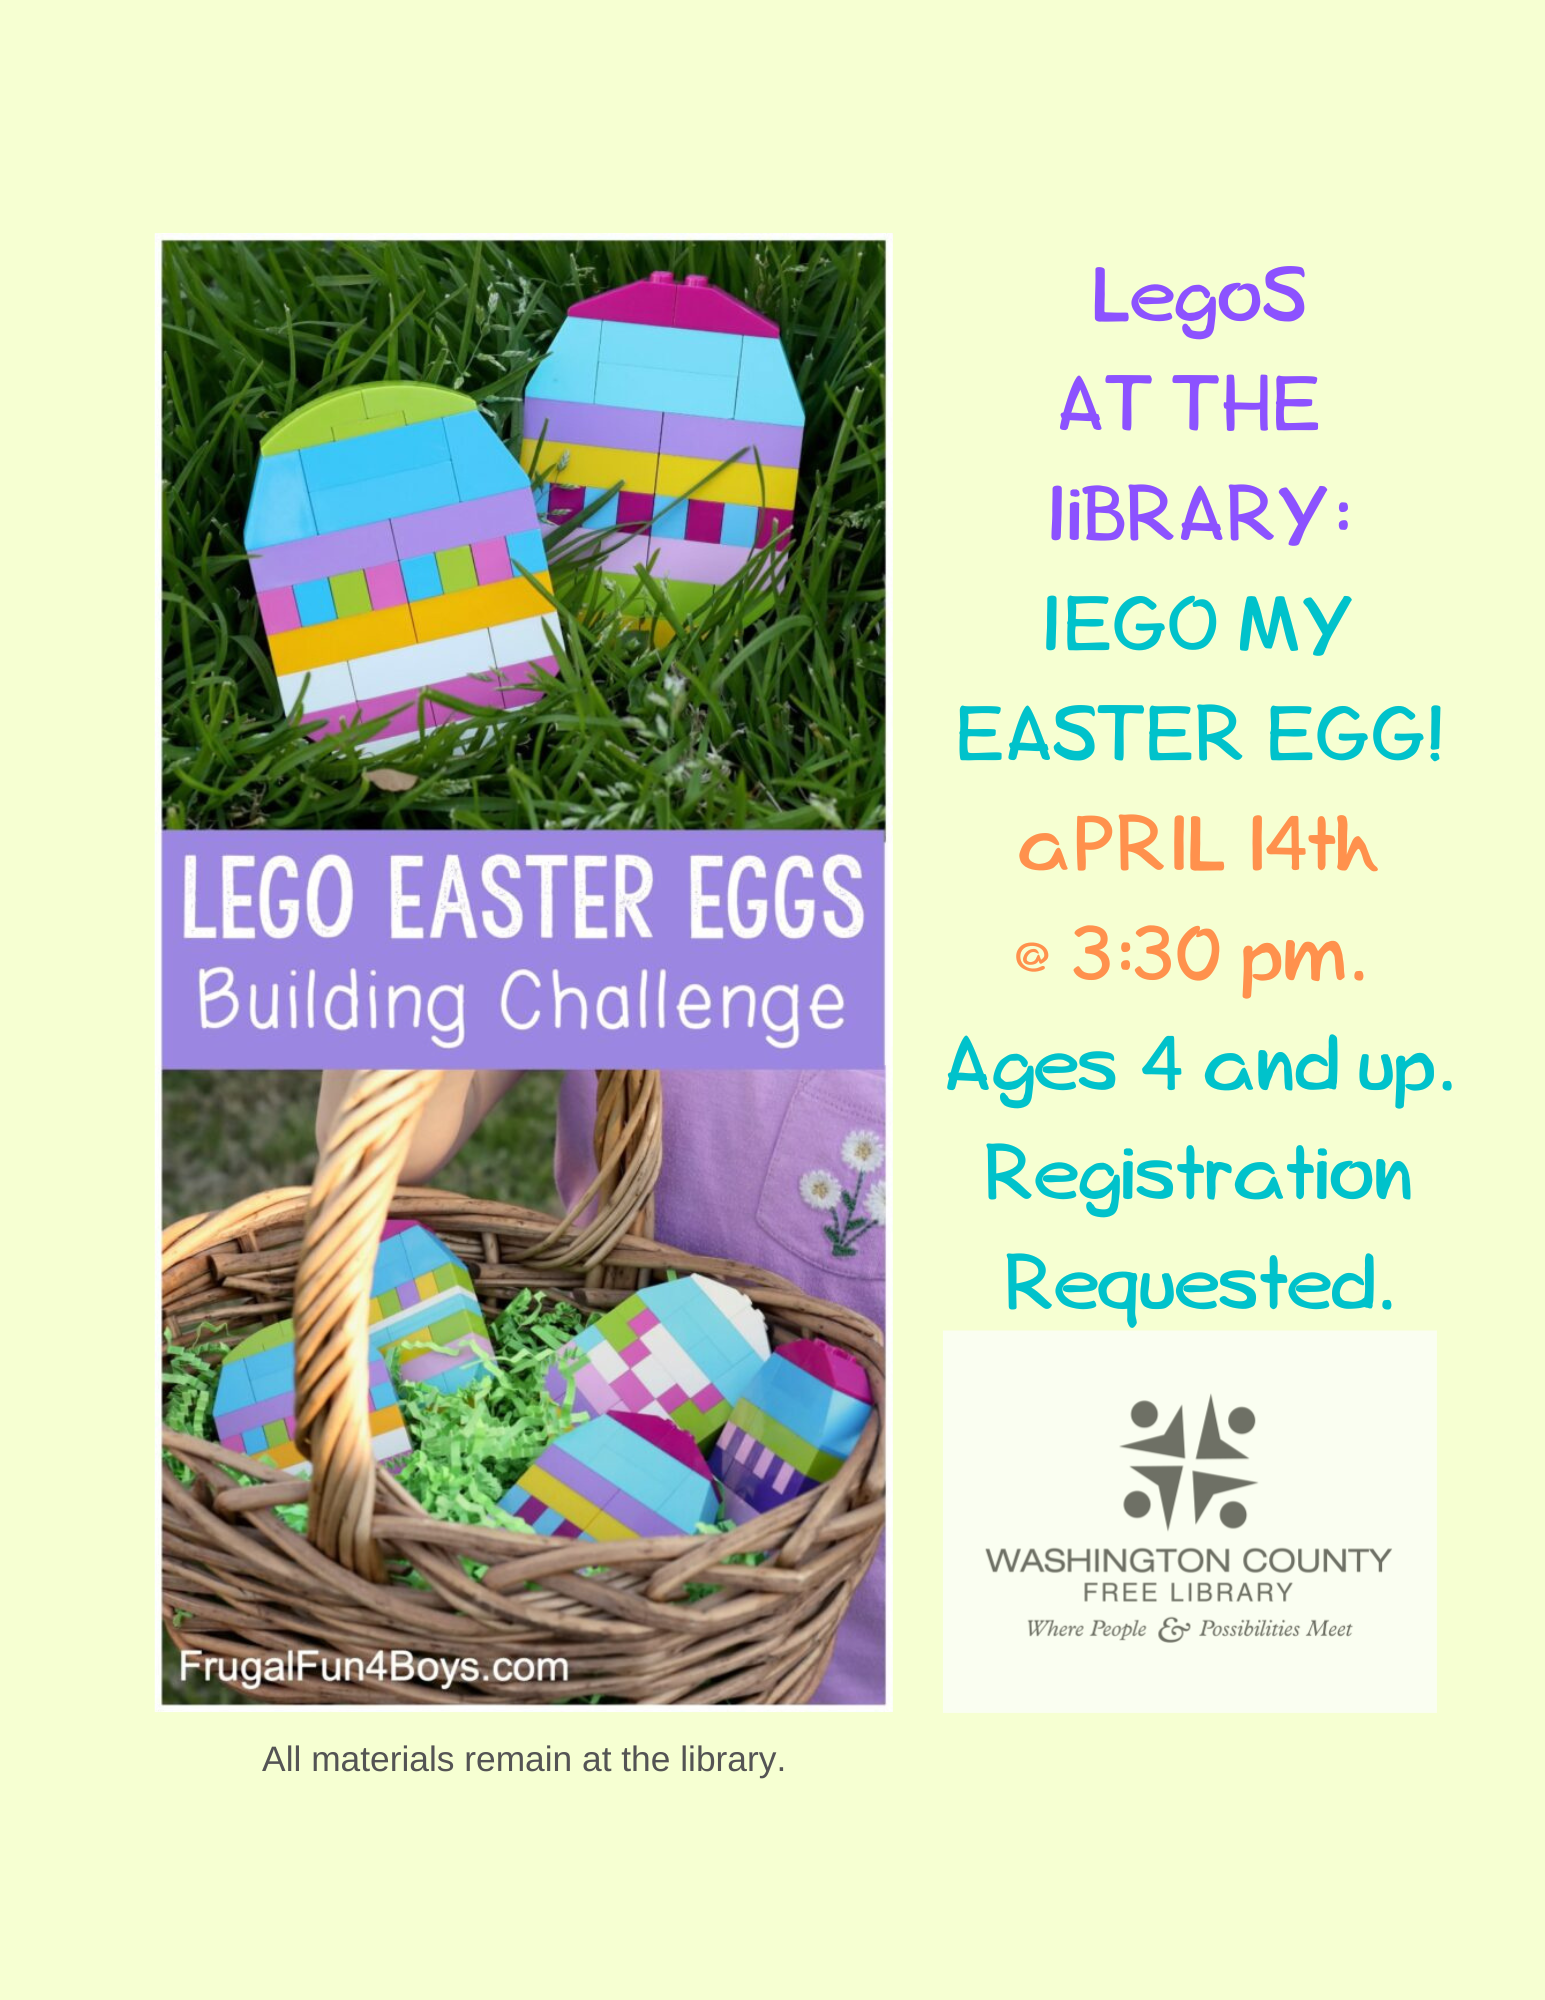 Legos at the Library: Lego My Easter Egg!